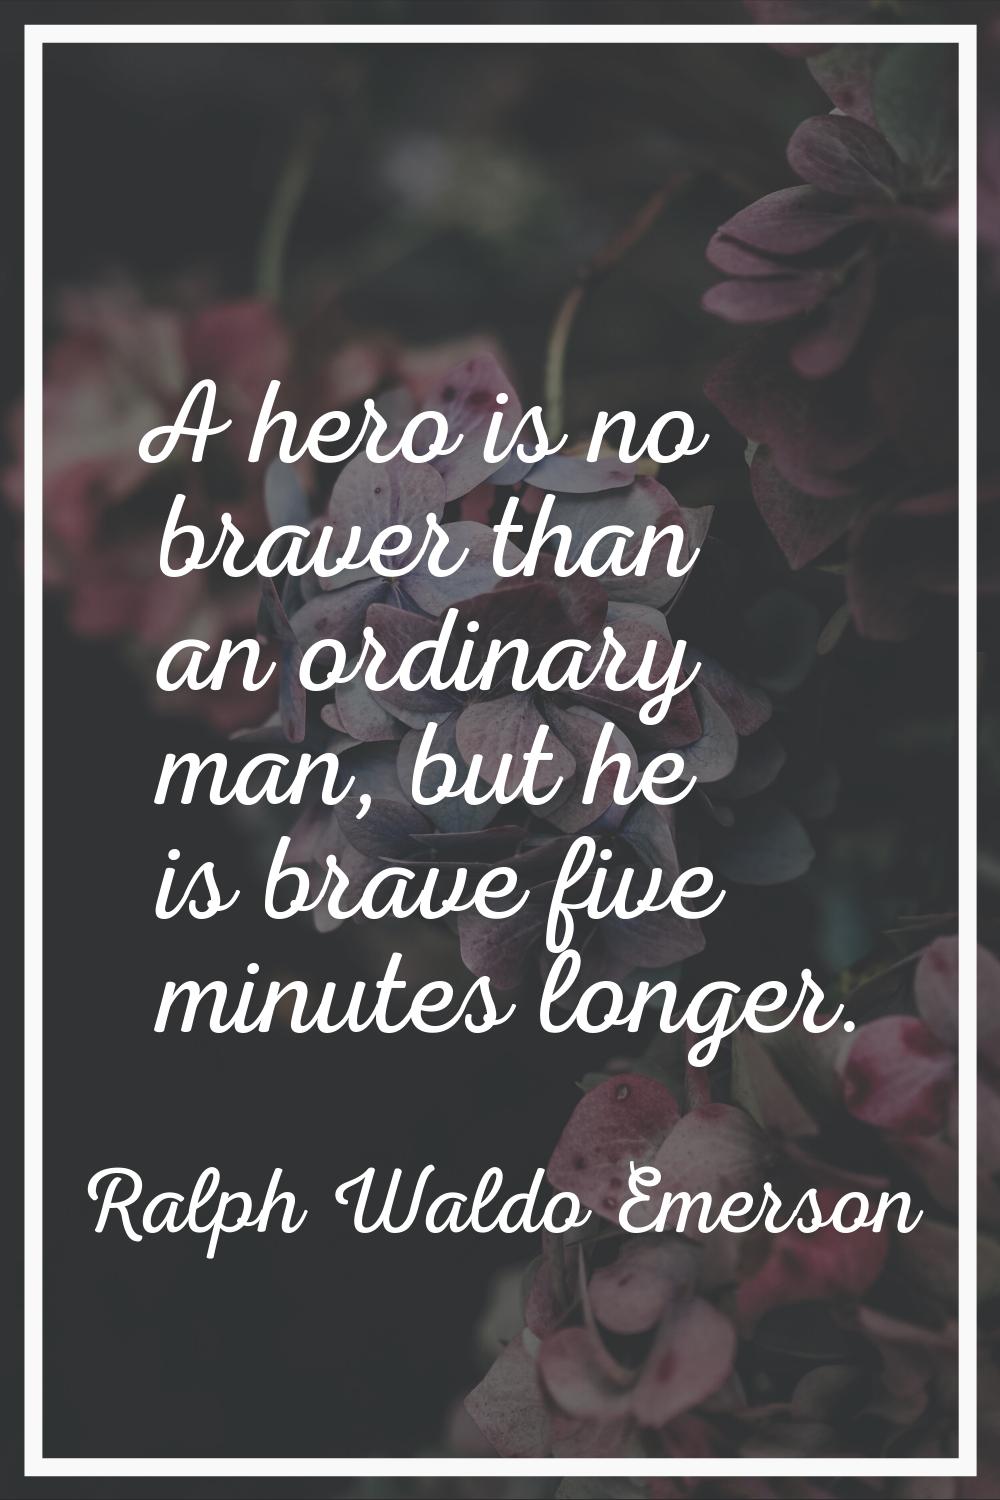 A hero is no braver than an ordinary man, but he is brave five minutes longer.